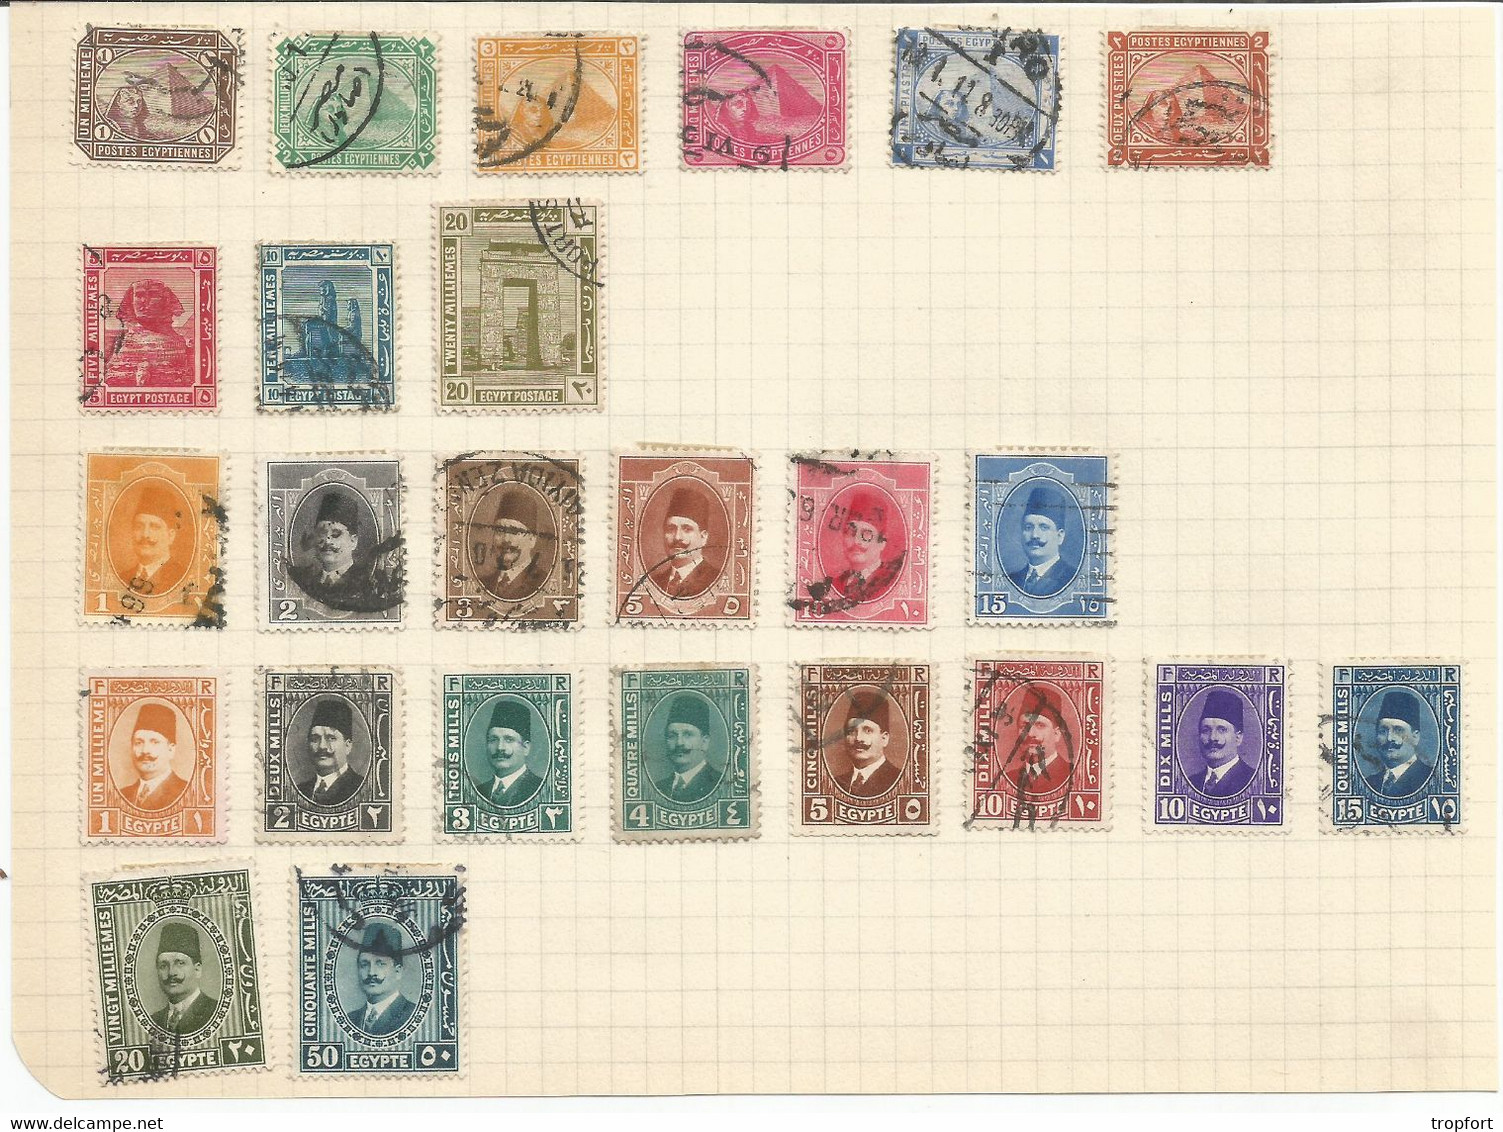 JP / Timbres EGYPTE Lot 25 TIMBRE EGYPT POSTAGE Poste Egyptienne - Voorfilatelie